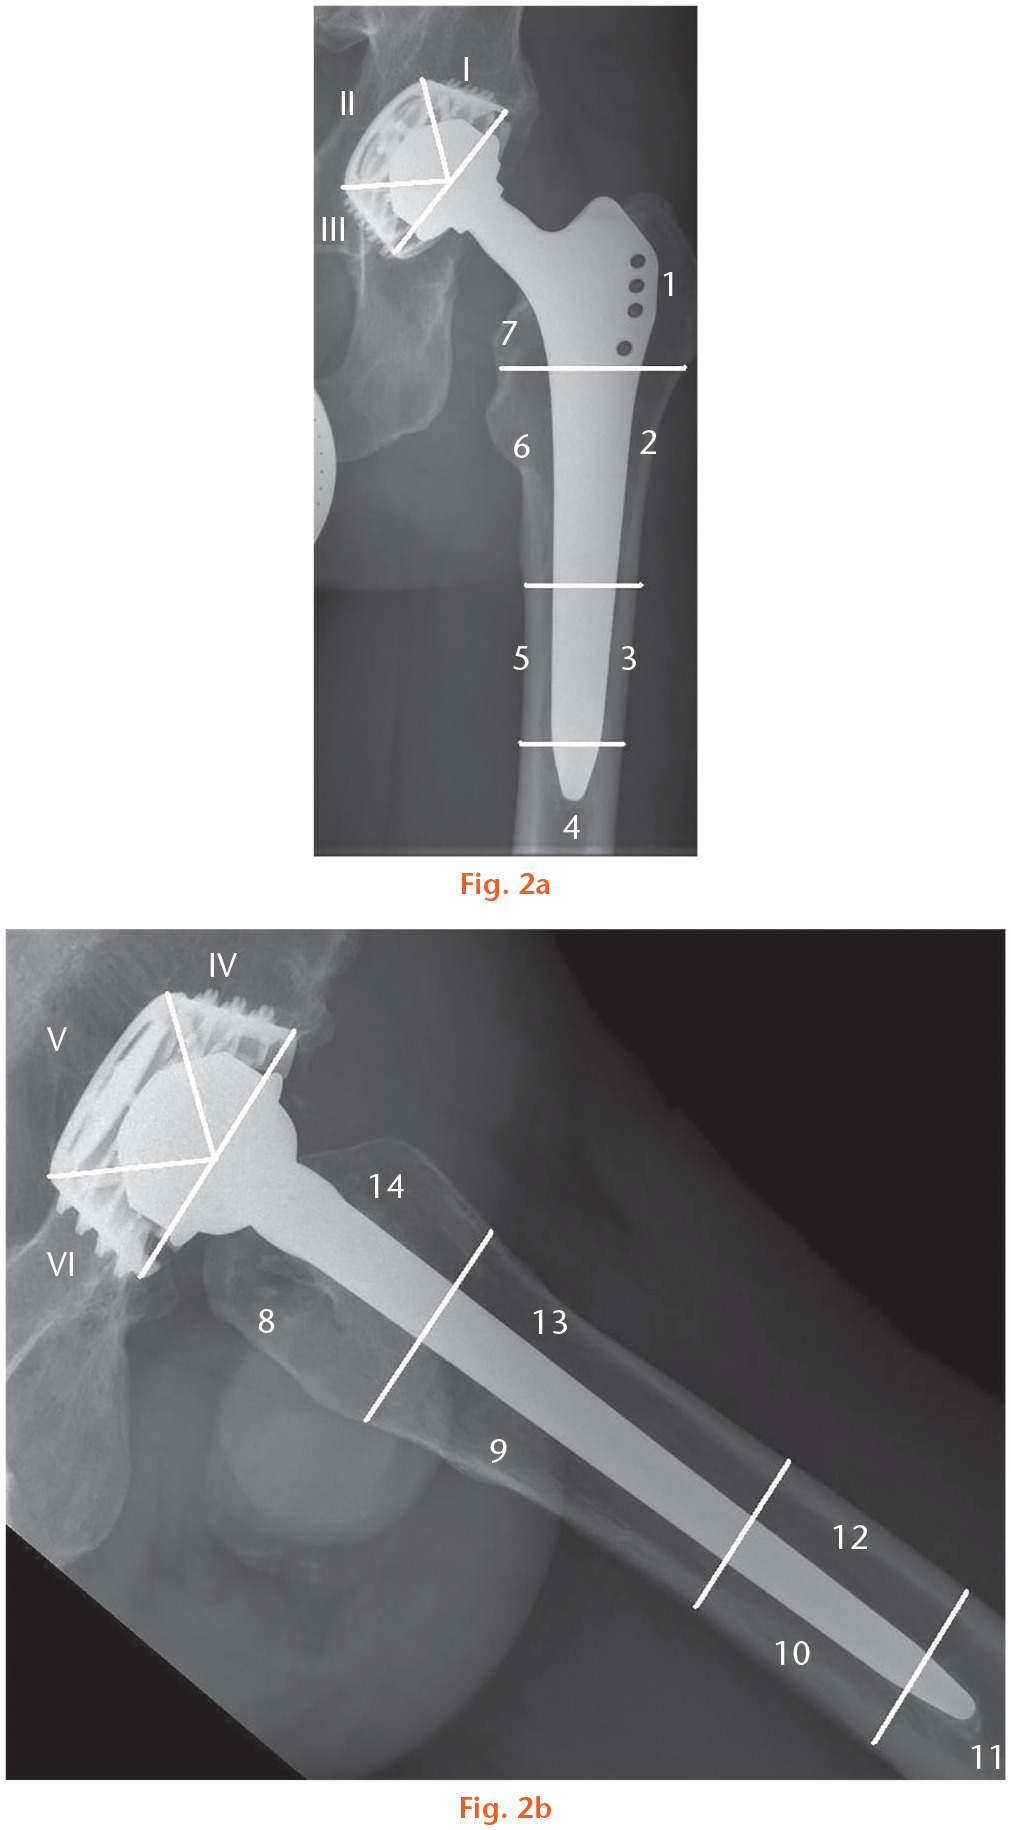 Fig. 2 
          a) Distribution of radiolucent lines and osteolytic lesions observed on an anteroposterior radiograph of the femoral component (Gruen zones, 1 to 728) and the cup (DeLee classification, I to III23) of a 56-year-old male patient at the last follow-up at 20 years. b) Distribution of radiolucent lines and osteolytic lesions observed on a lateral radiograph of the femoral component (Gruen zones, 8 to 1428) and the cup (DeLee classification, IV to VI23) of a 56-year-old male patient at the last follow-up at 20 years.
        